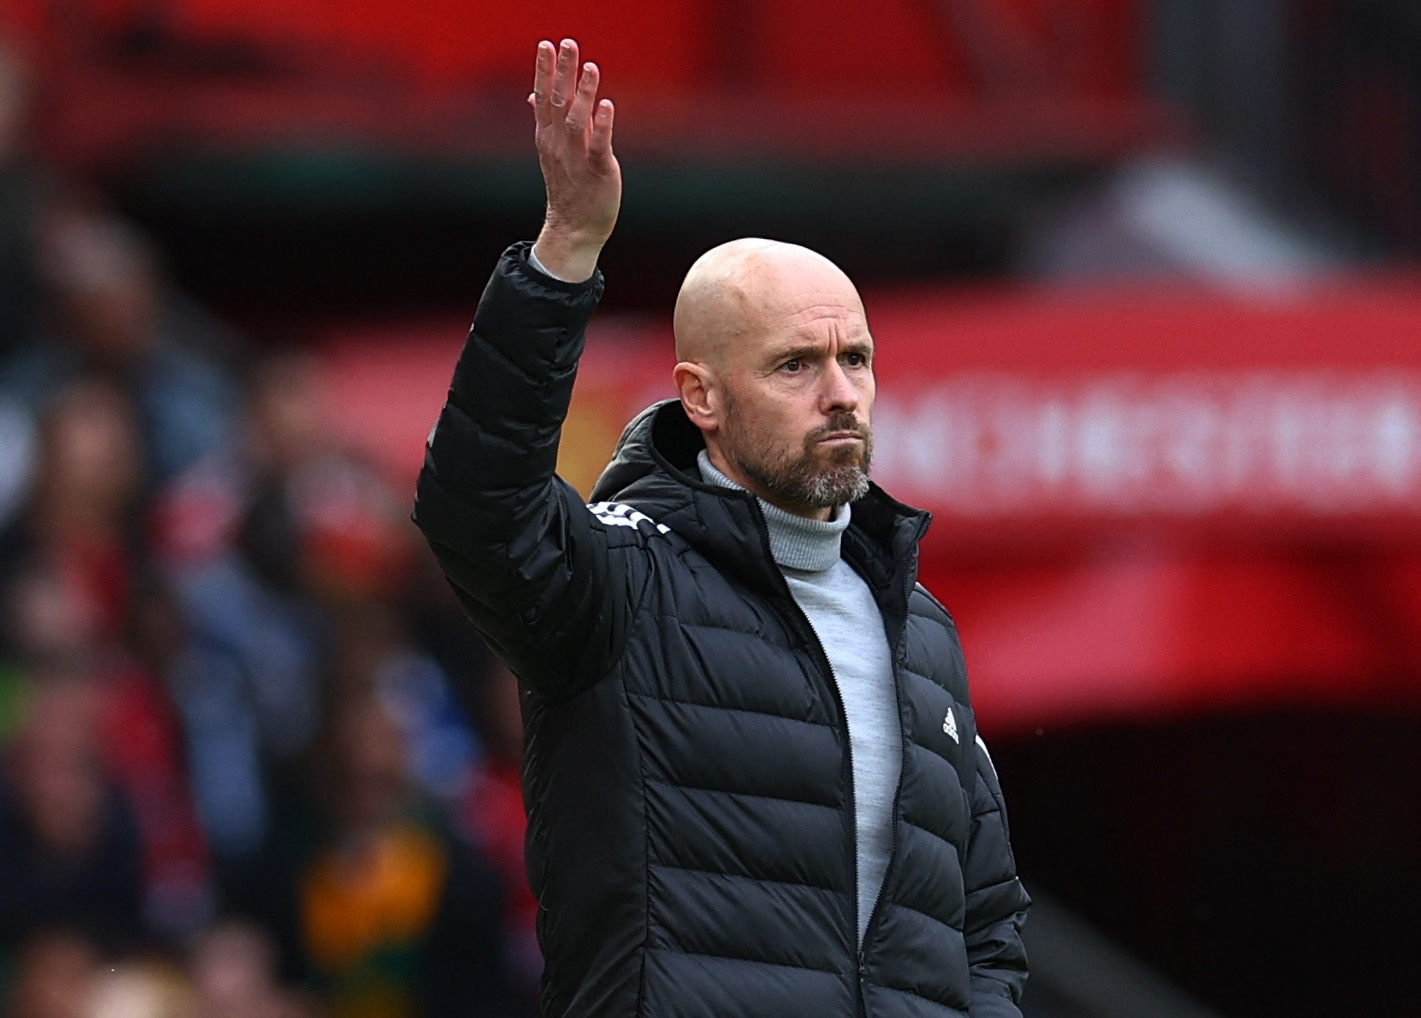 Ten Hag keeping Man Utd 'on their toes' with team selections - Shaw | Reuters